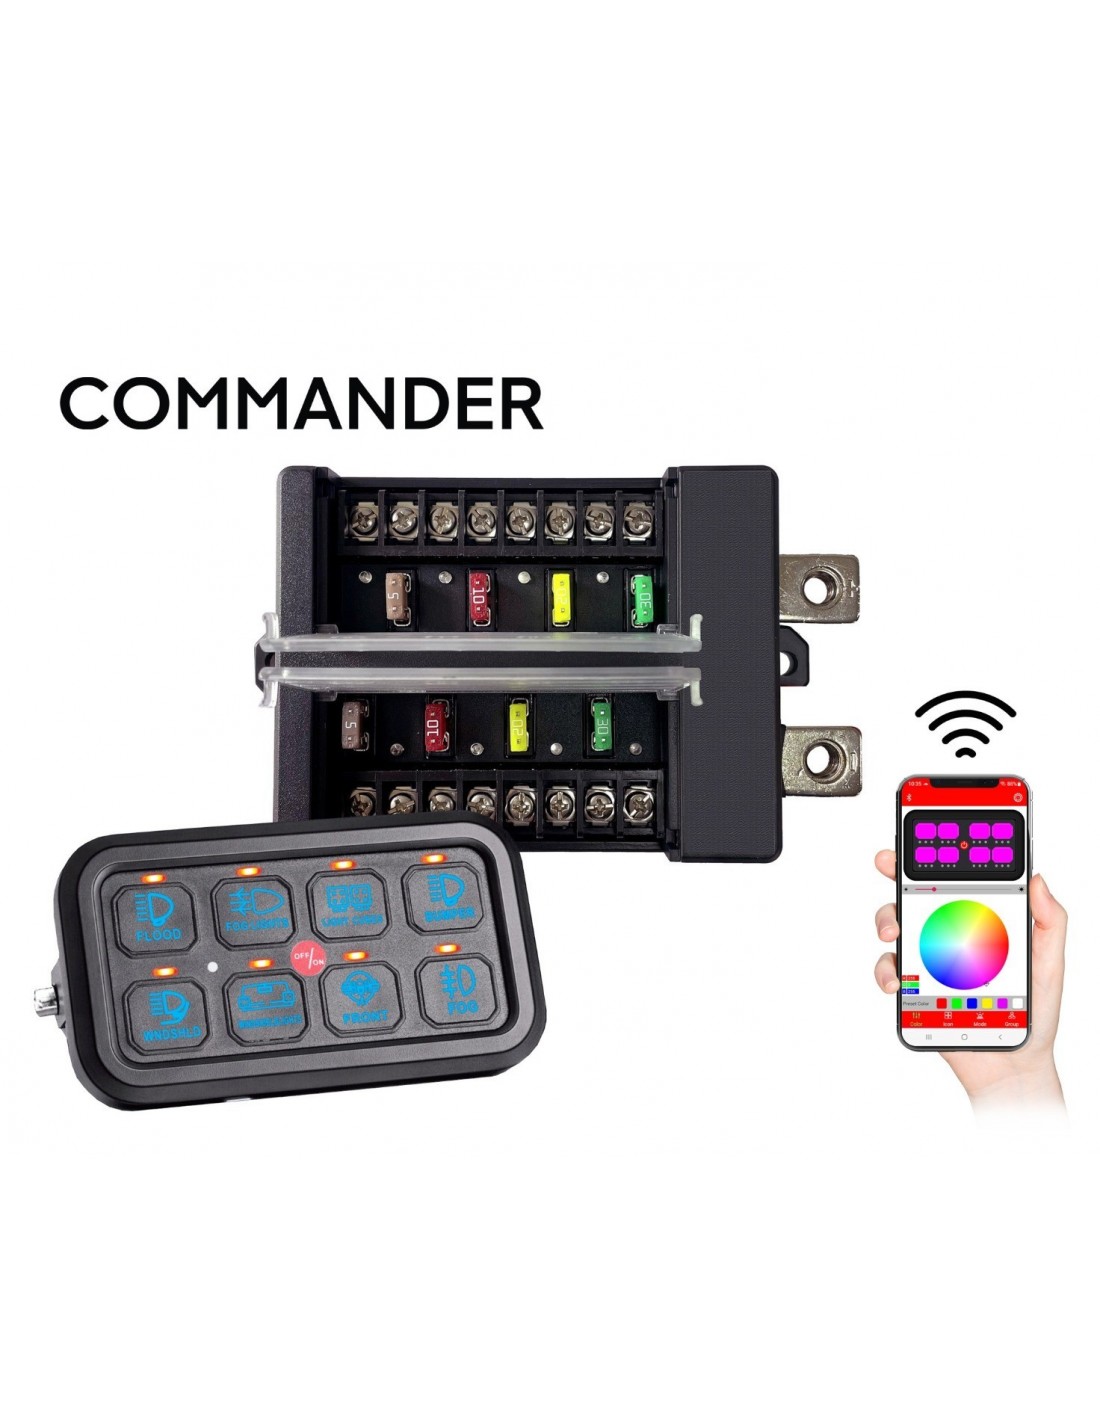 Truck is Drug - LEDSON Commander - remote control kit with bluetooth